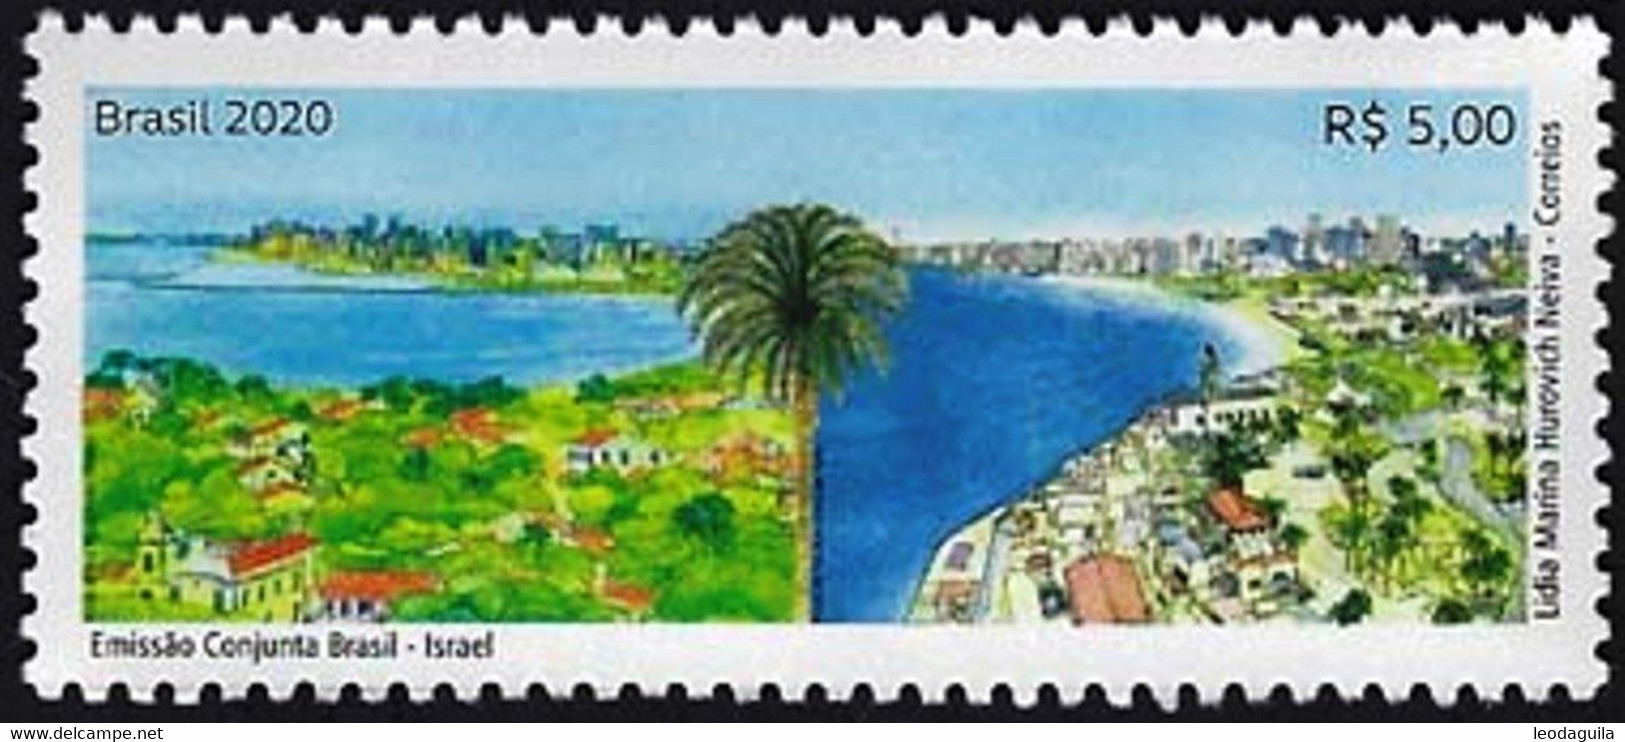 BRAZIL 2020  - ISRAEL And BRAZIL LANDSCAPE - JOINT ISSUE  - MNH - Ungebraucht